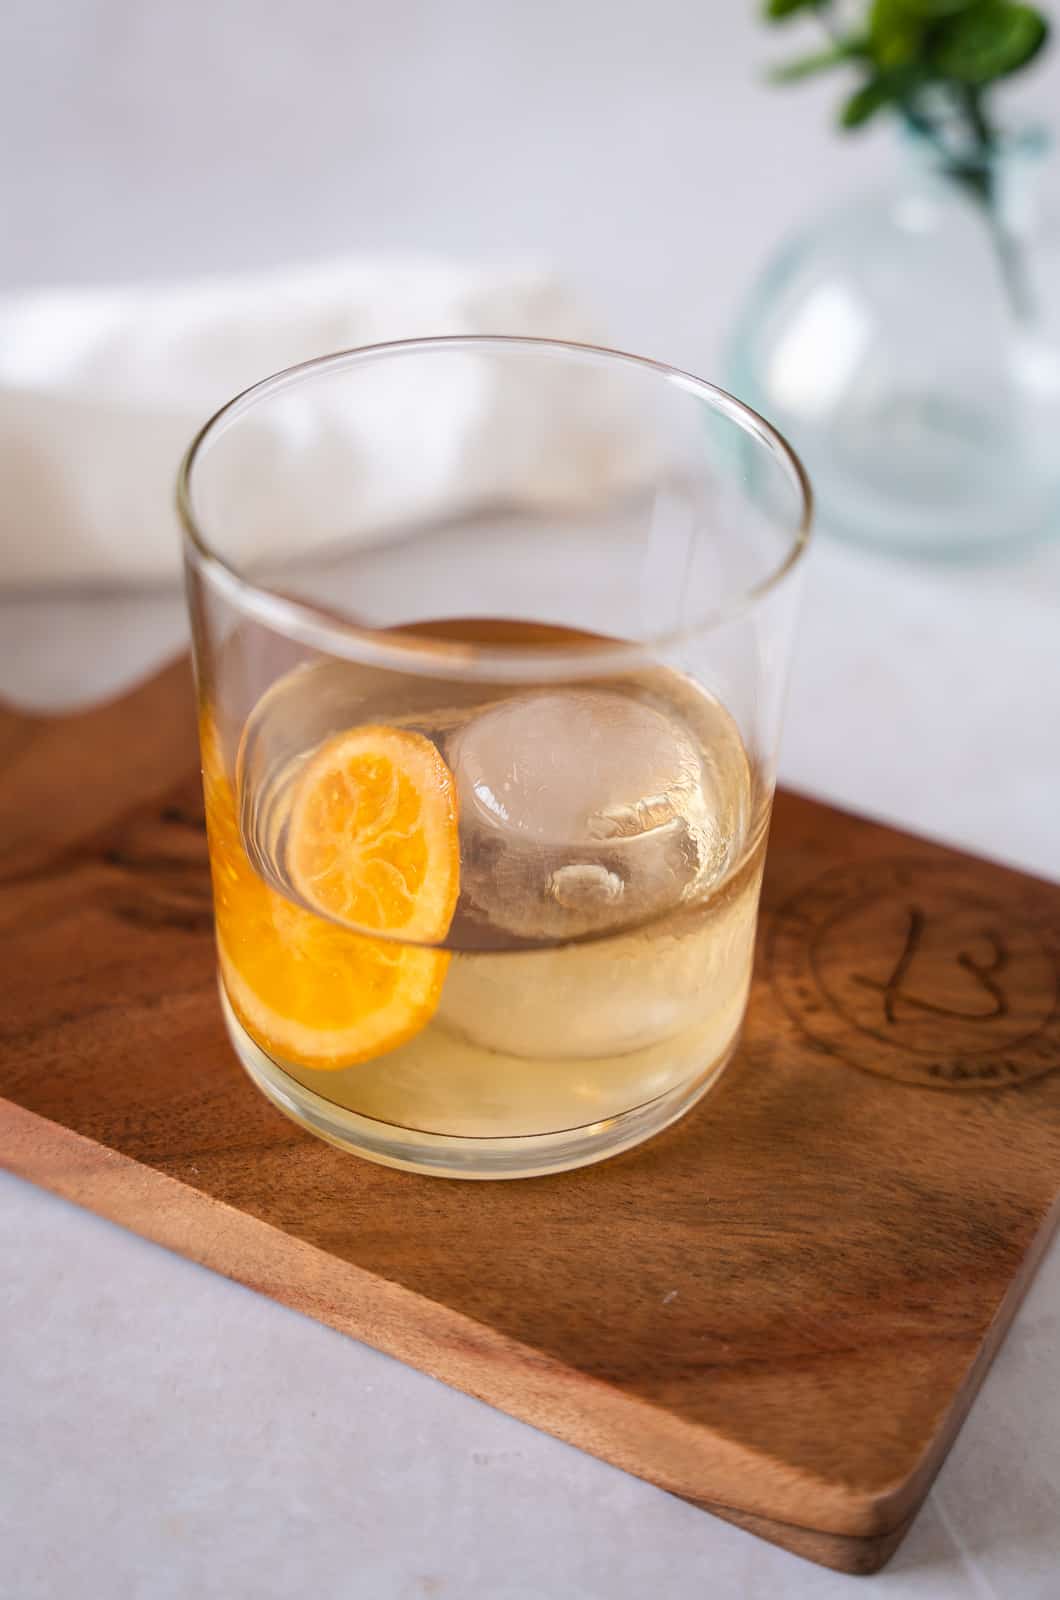 Cocktail in a glass with an orange slice and ice ball.